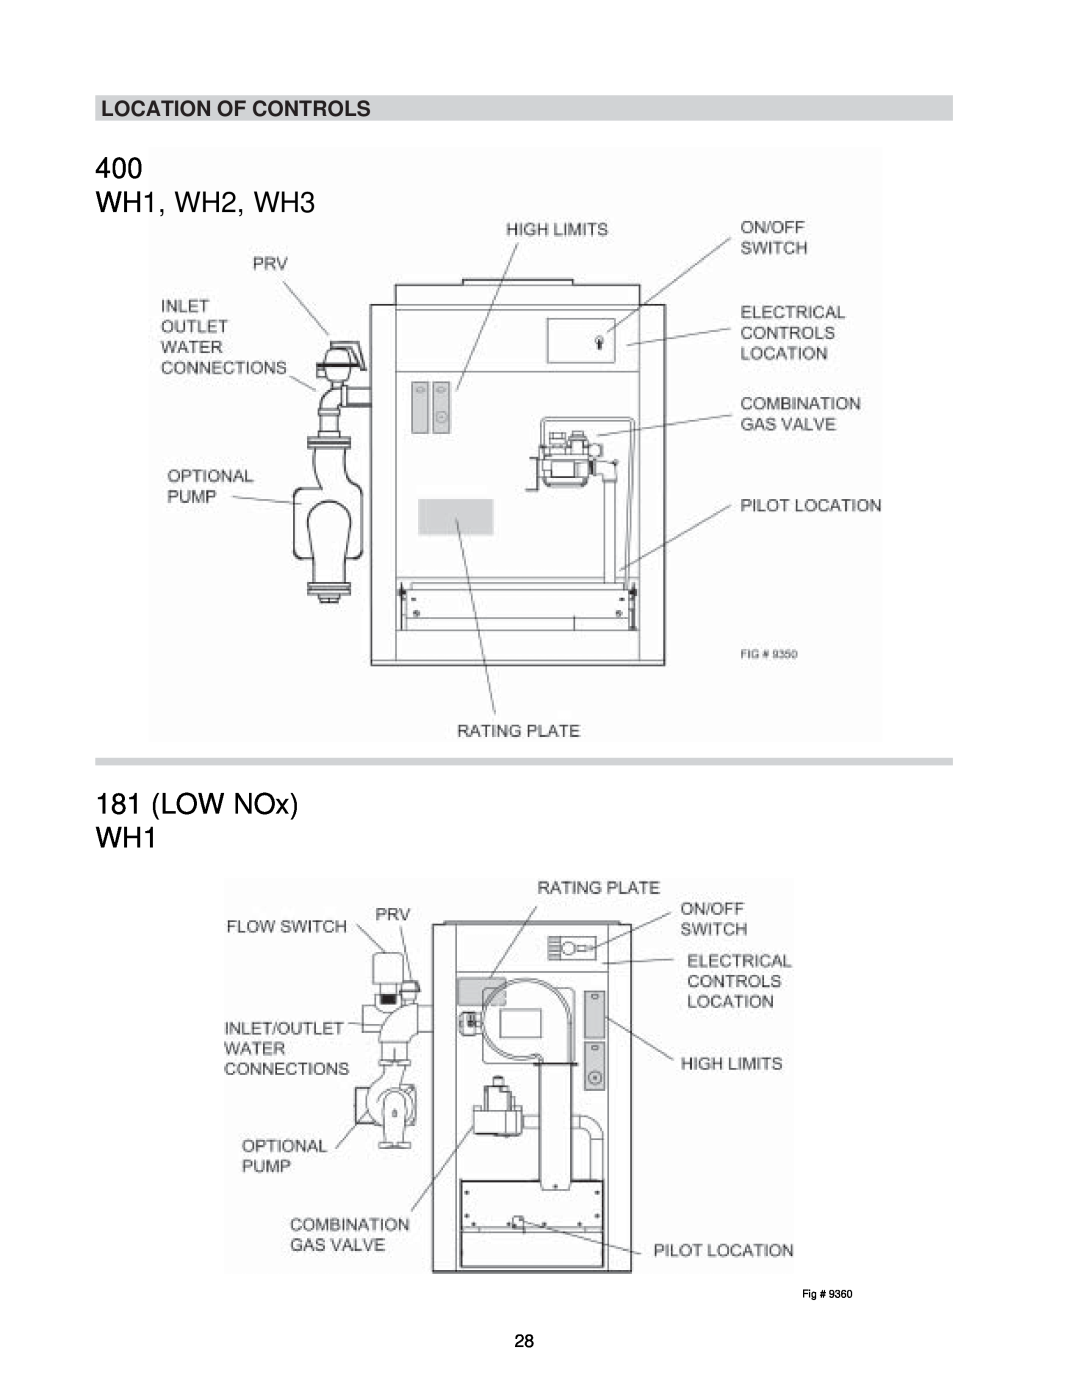 Raypak NH, 0133-4001 WH manual Location Of Controls, 400 WH1, WH2, WH3 181 LOW NOx WH1 